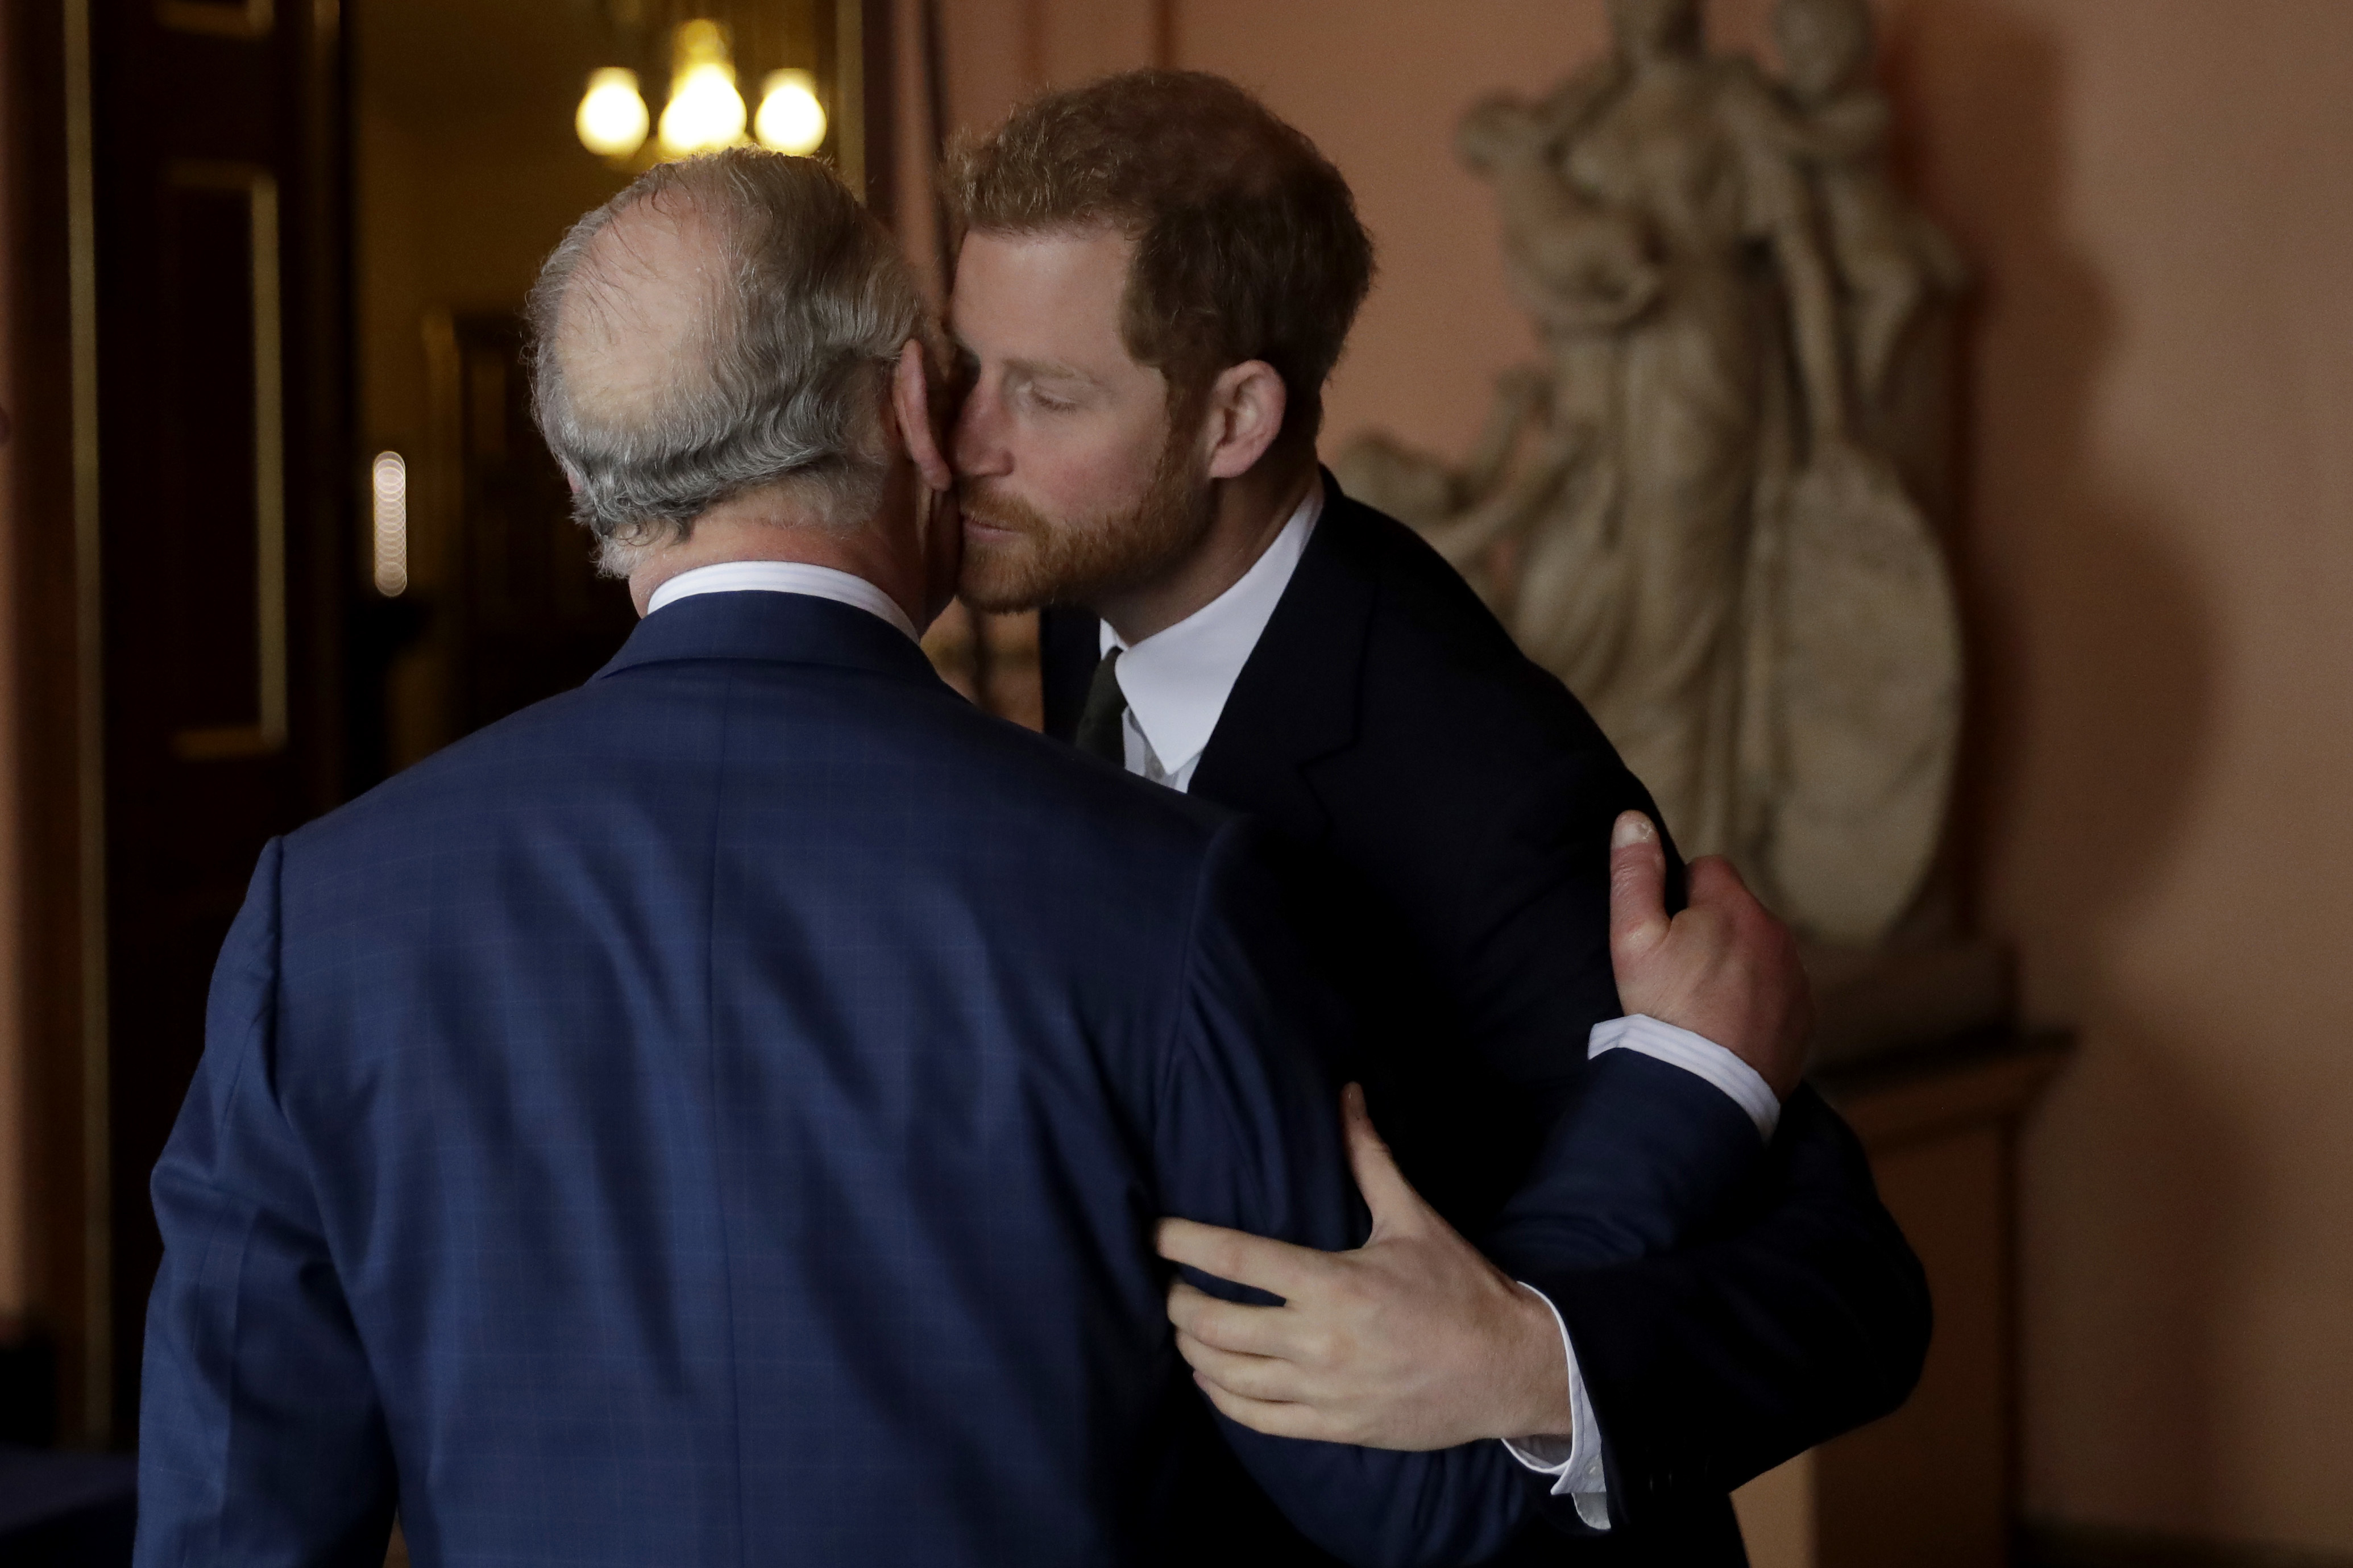 King Charles III and Prince Harry arrive to attend the "International Year of The Reef" 2018 meeting at Fishmongers Hall on February 14, 2018 in London, England. | Source: Getty Images